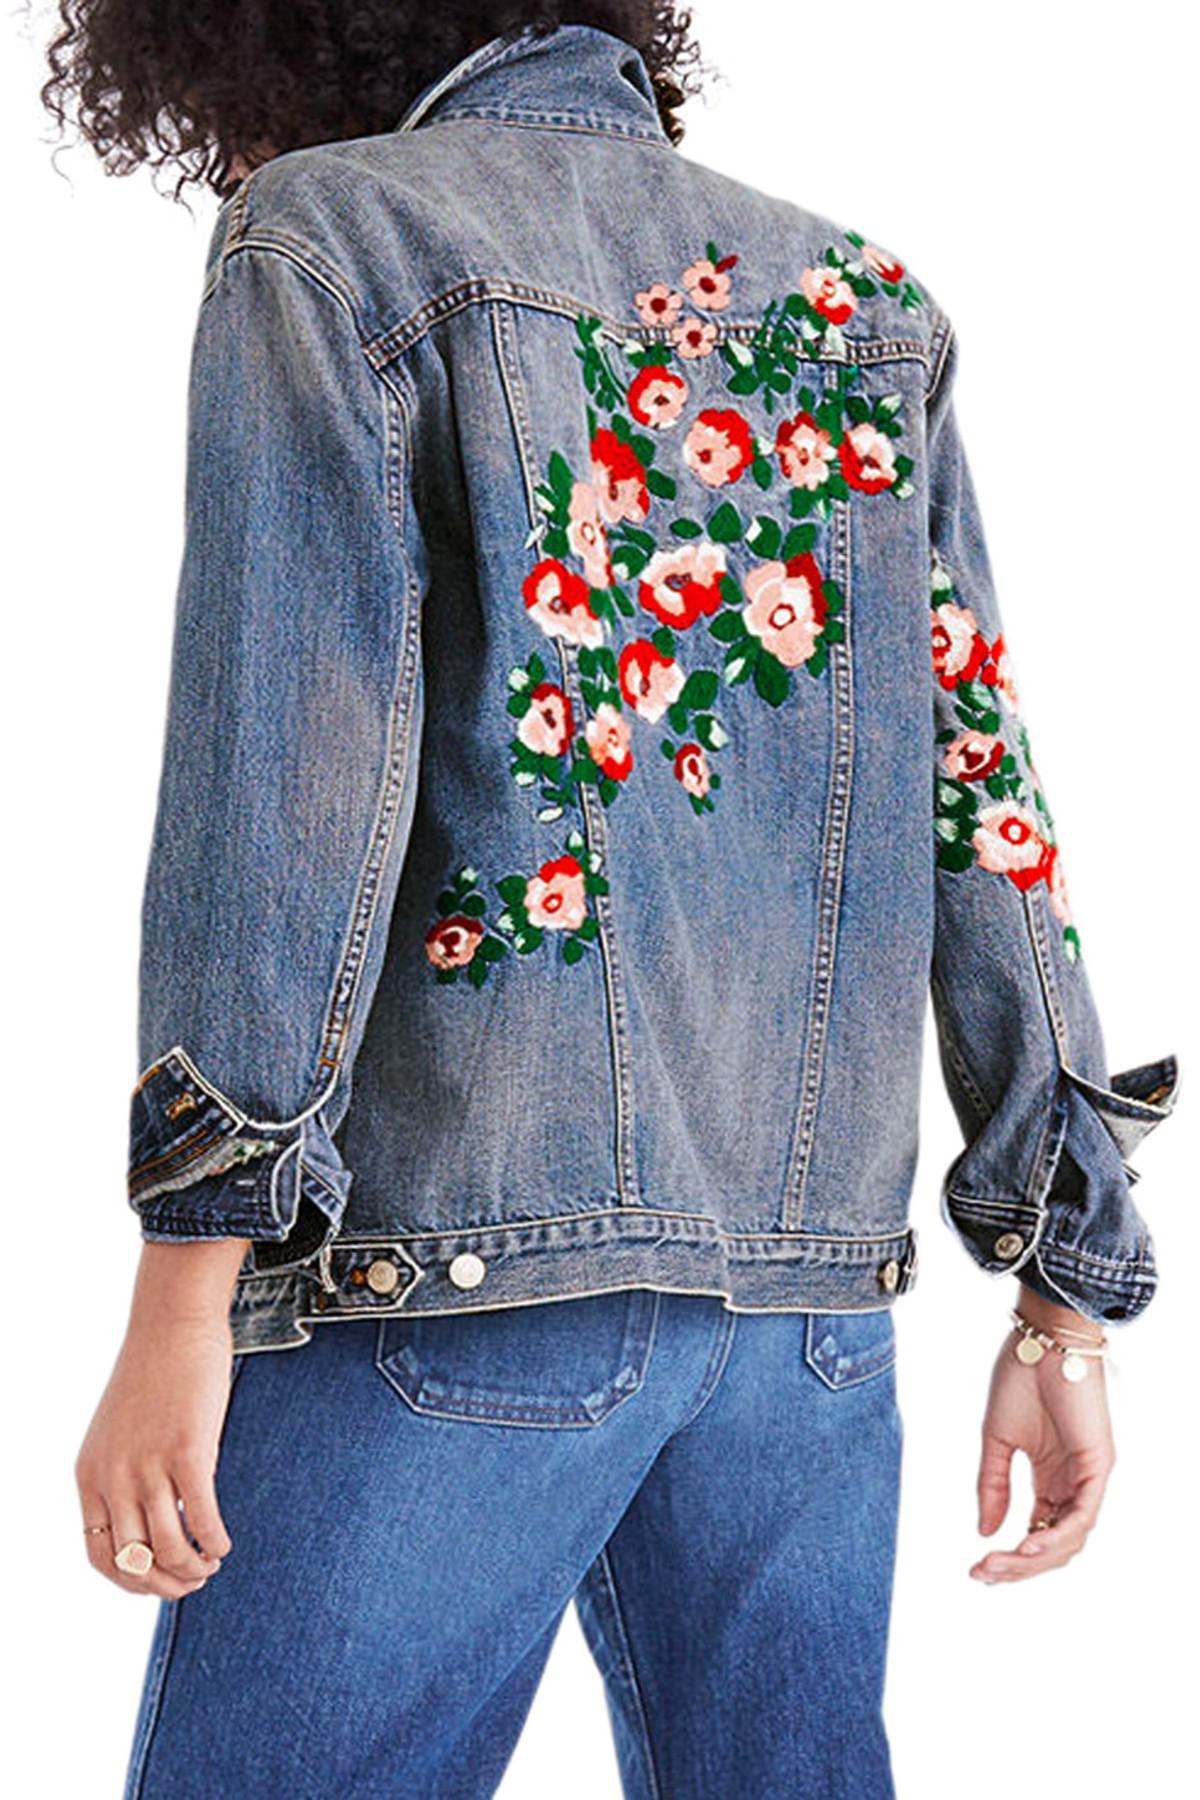 Madewell Embroidered Denim Jacket in Blue - Lyst